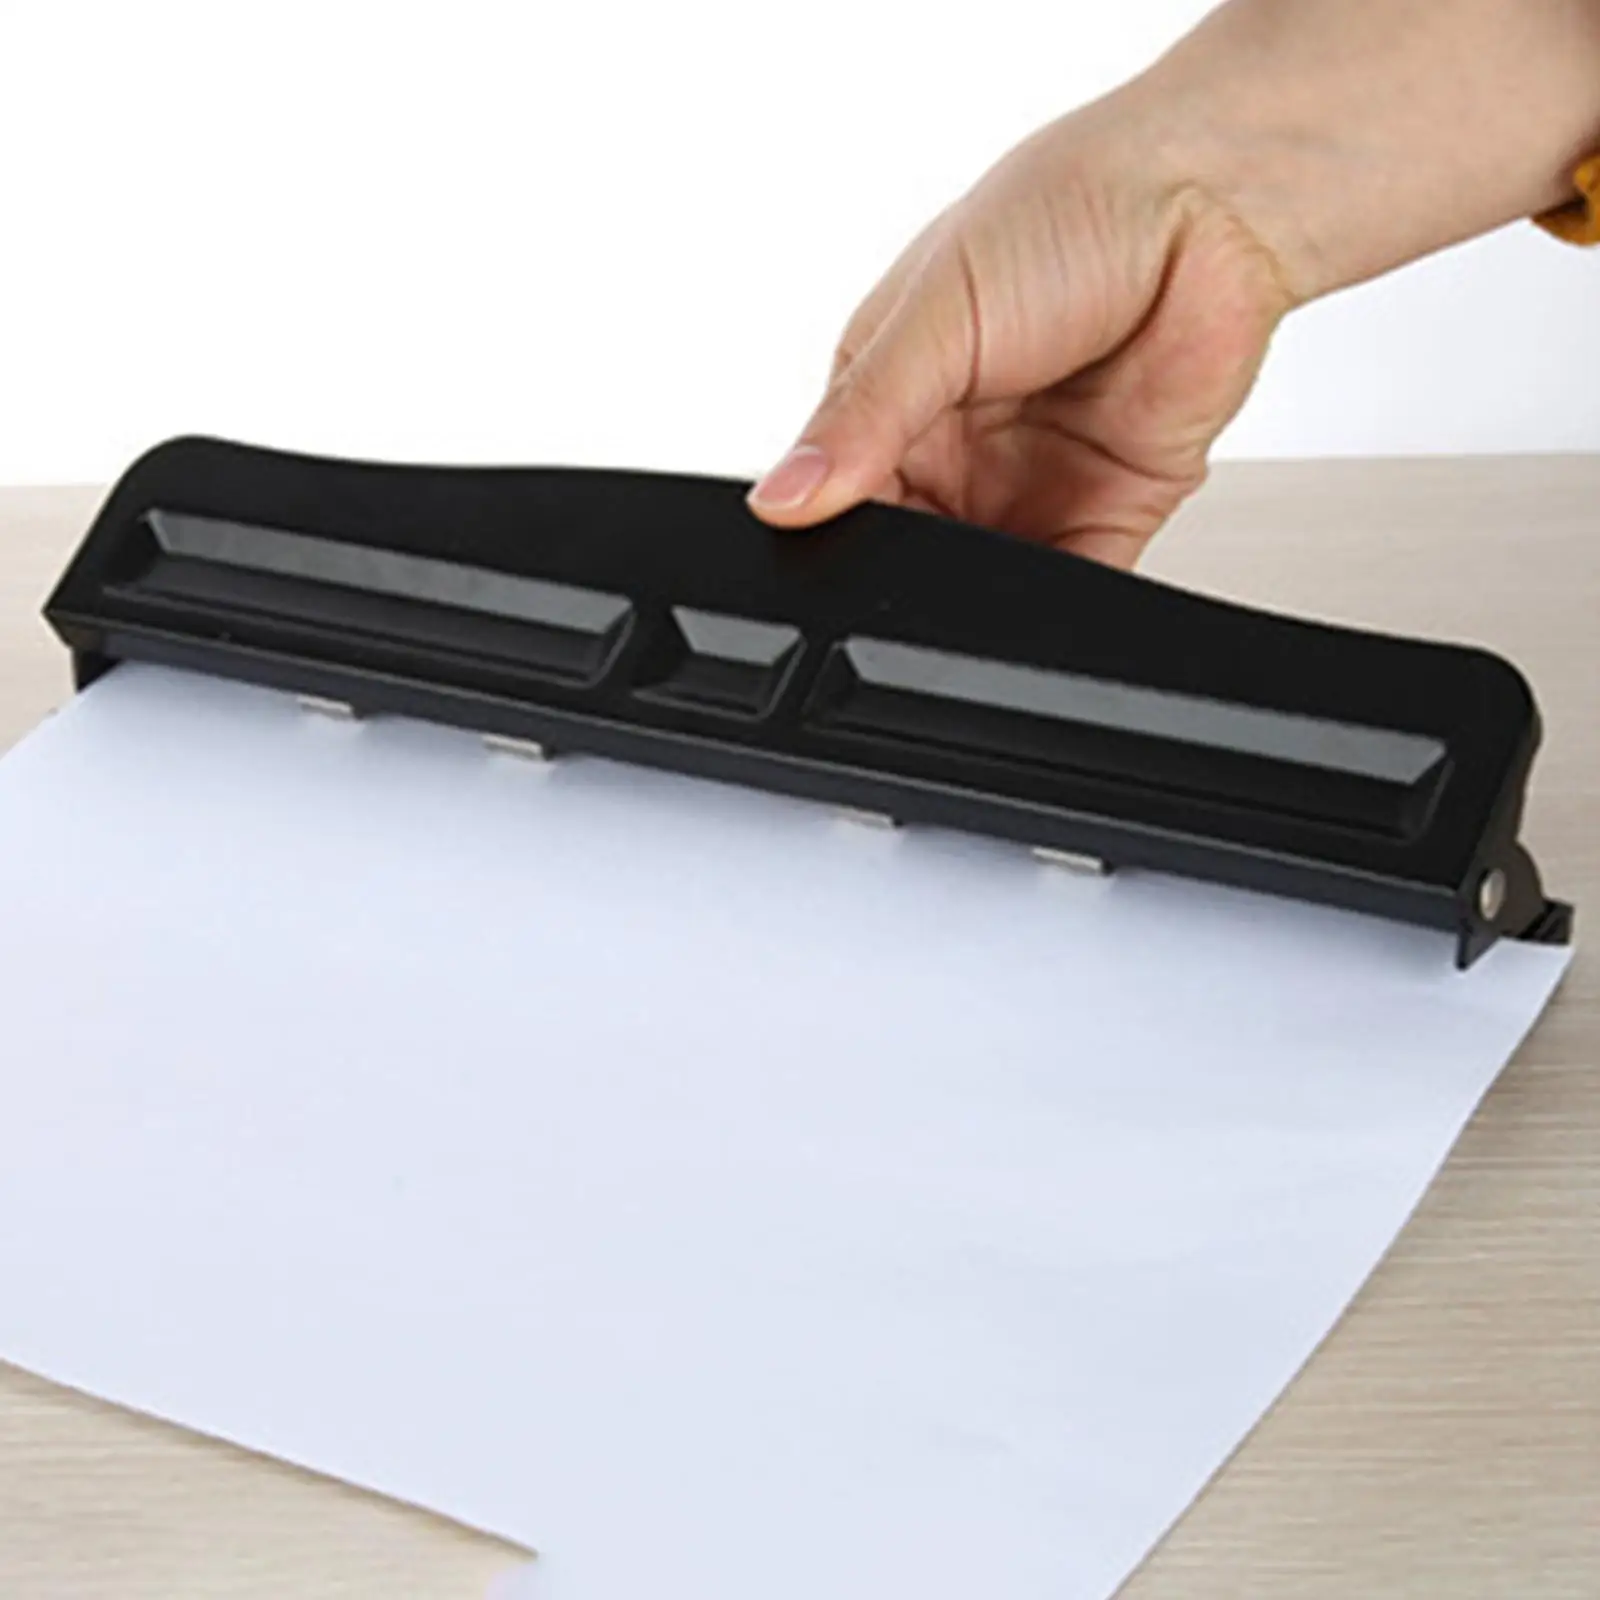 3 Hole Punch File Binding Manual Heavy Duty 12 Sheet Capacity Paper Punch for Classroom Working Learning Office